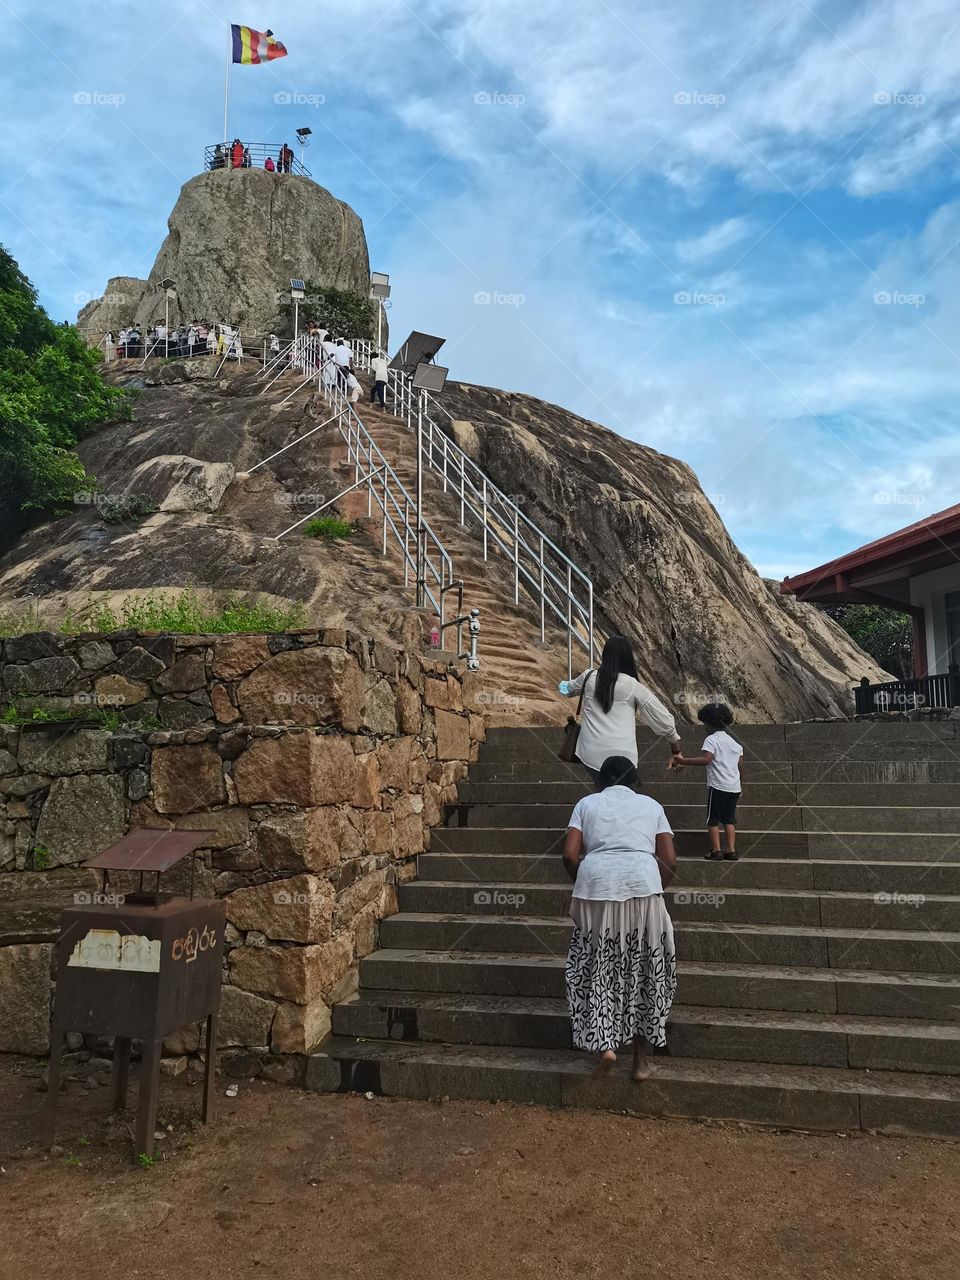 Sacred place in Sri Lanka, mihinthale temple